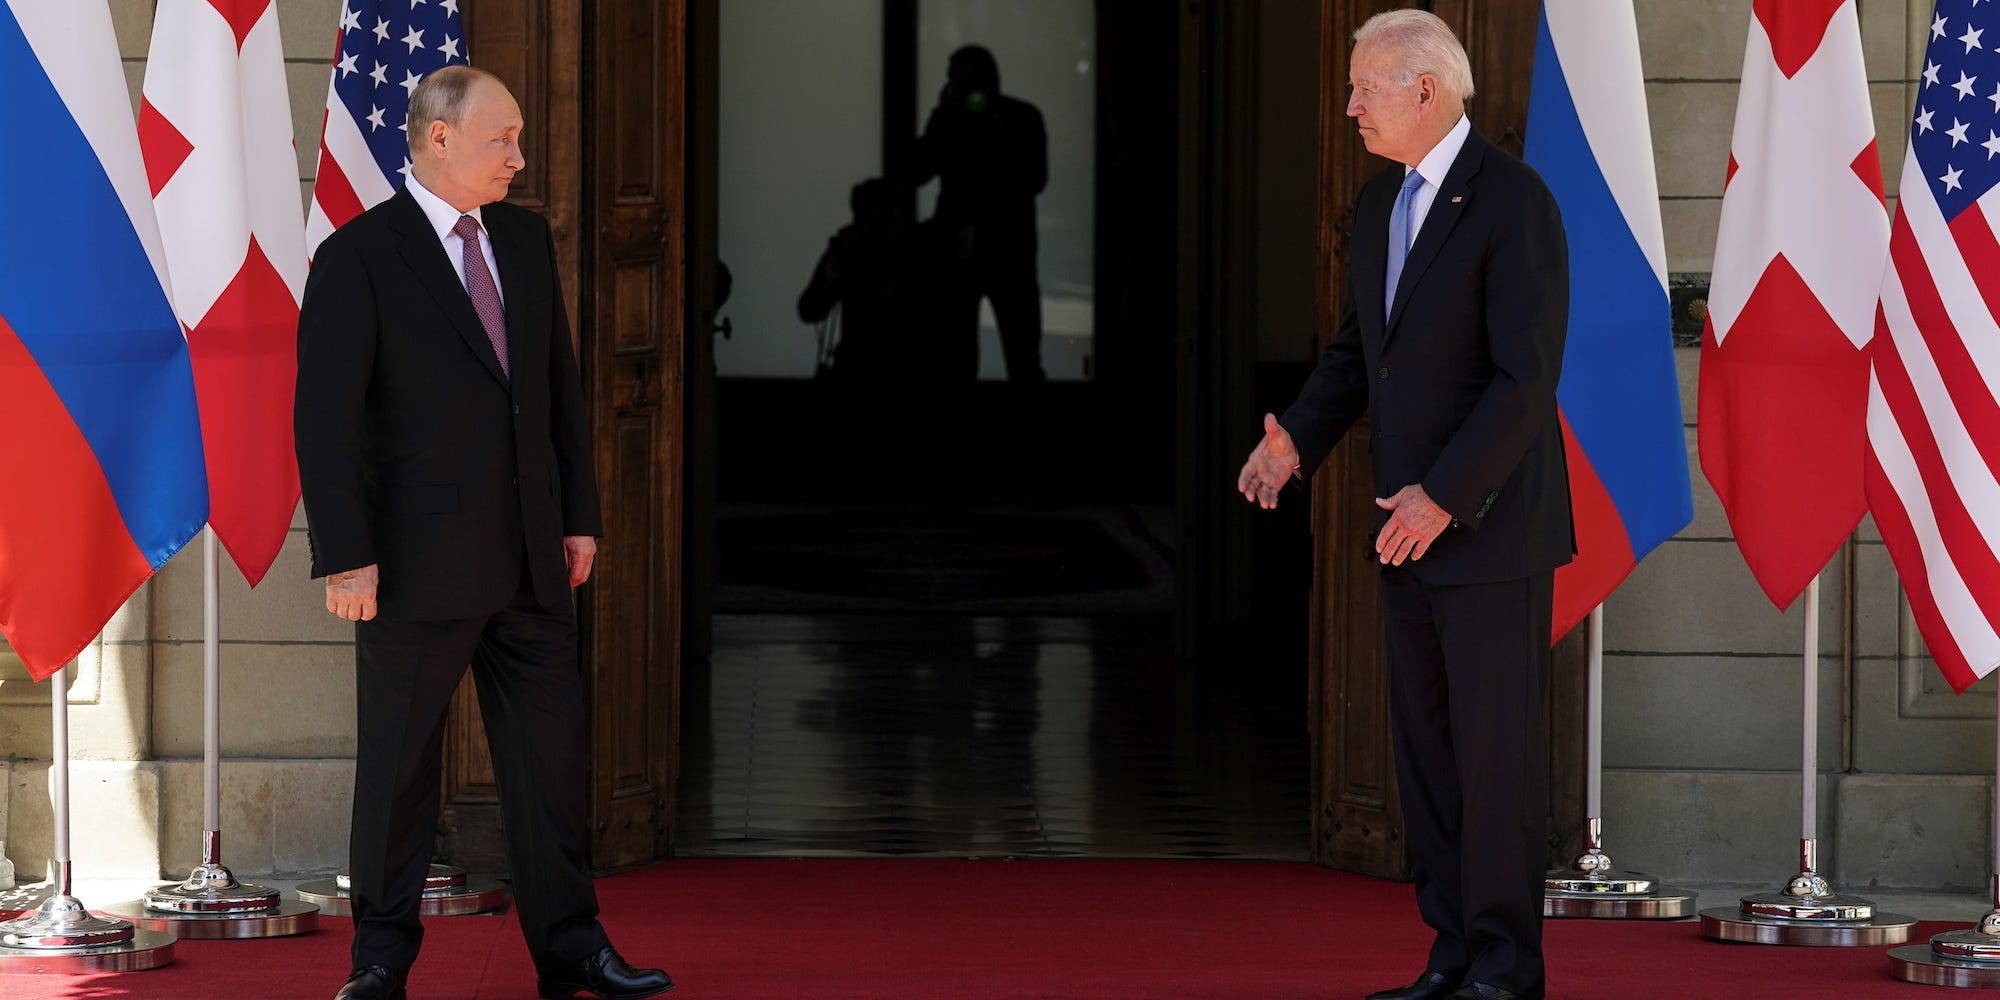 Presidents Vladimir Putin and Joe Biden facing each other at the doorway to the building where they are to meet